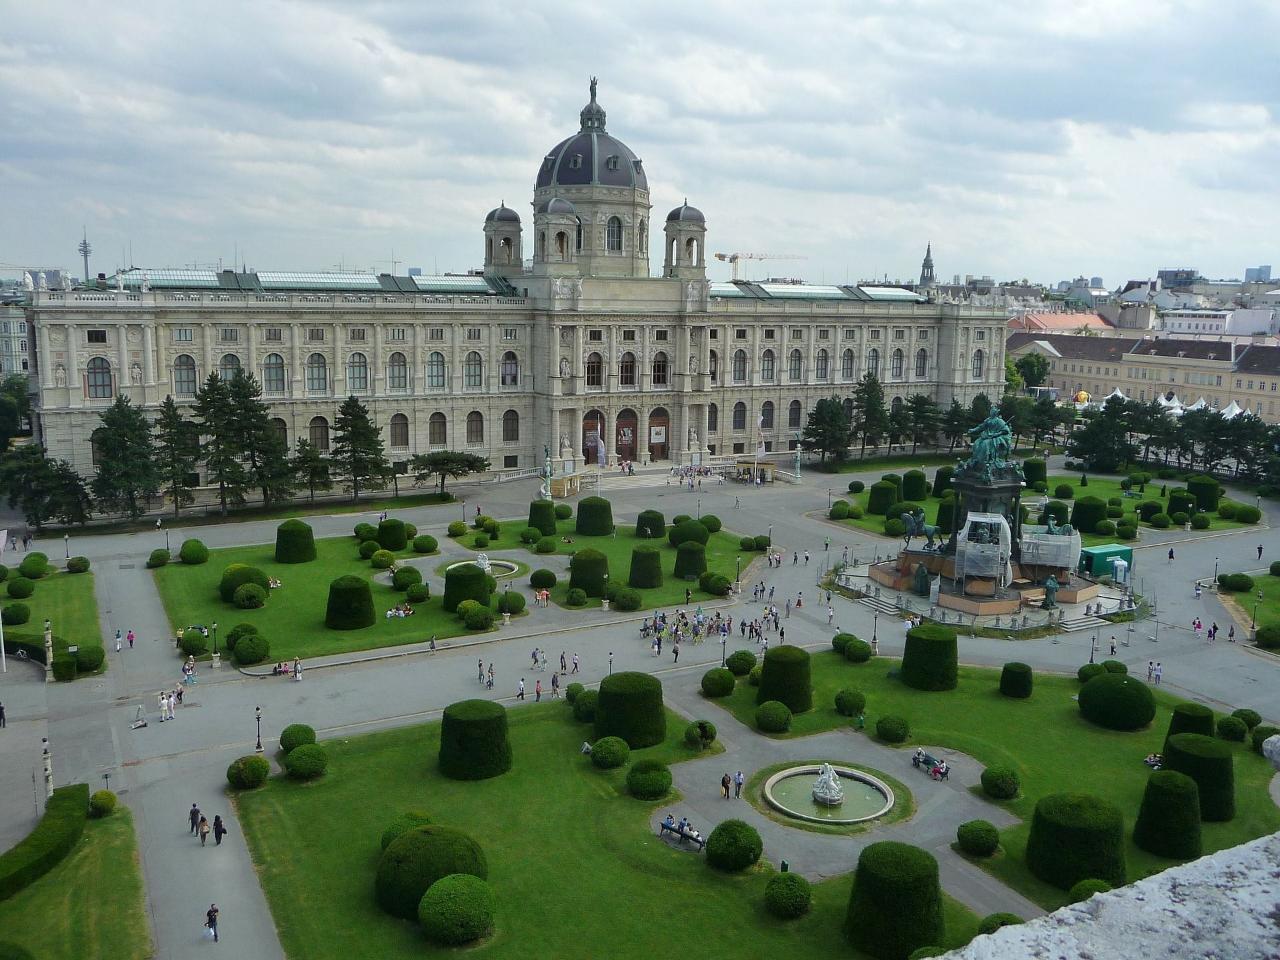 Vienna’s Ringstrasse Project - 3-hour walk with a Friendly Historian